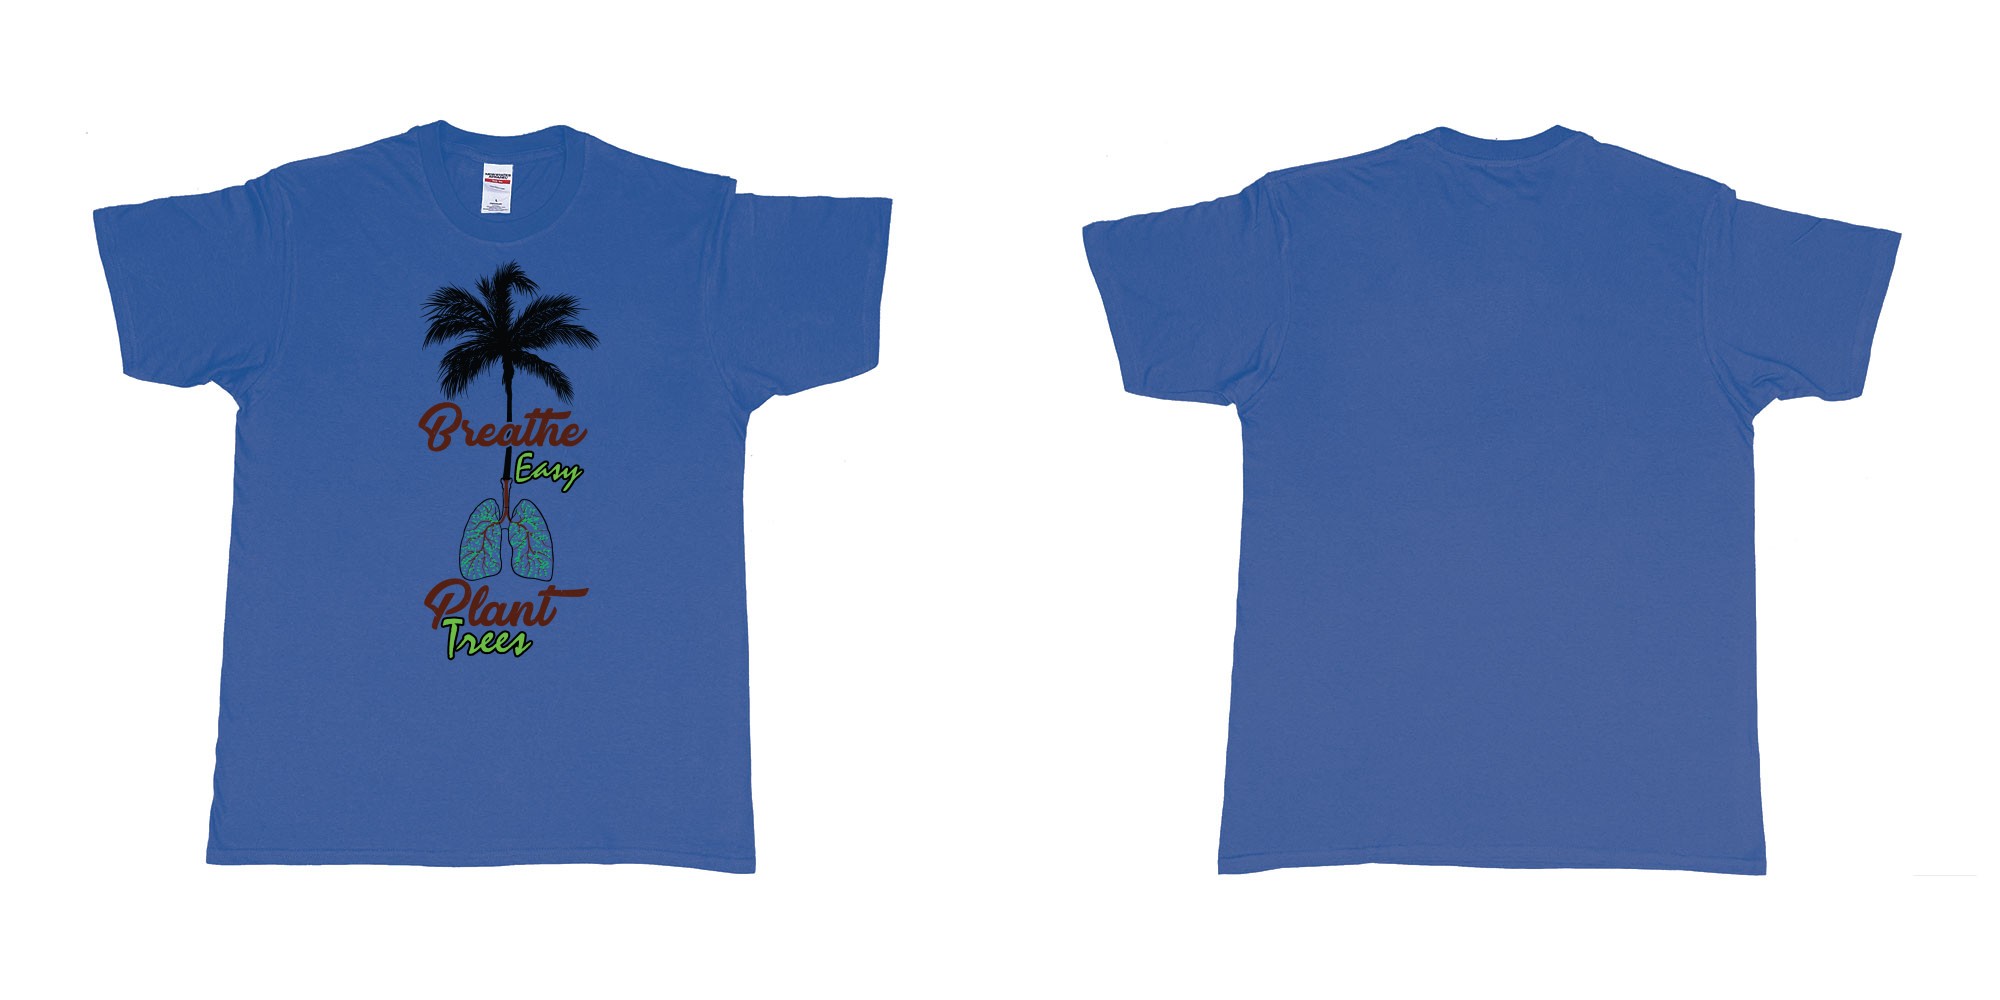 Custom tshirt design breathe easy and plant a tree for better air for everyone in fabric color royal-blue choice your own text made in Bali by The Pirate Way